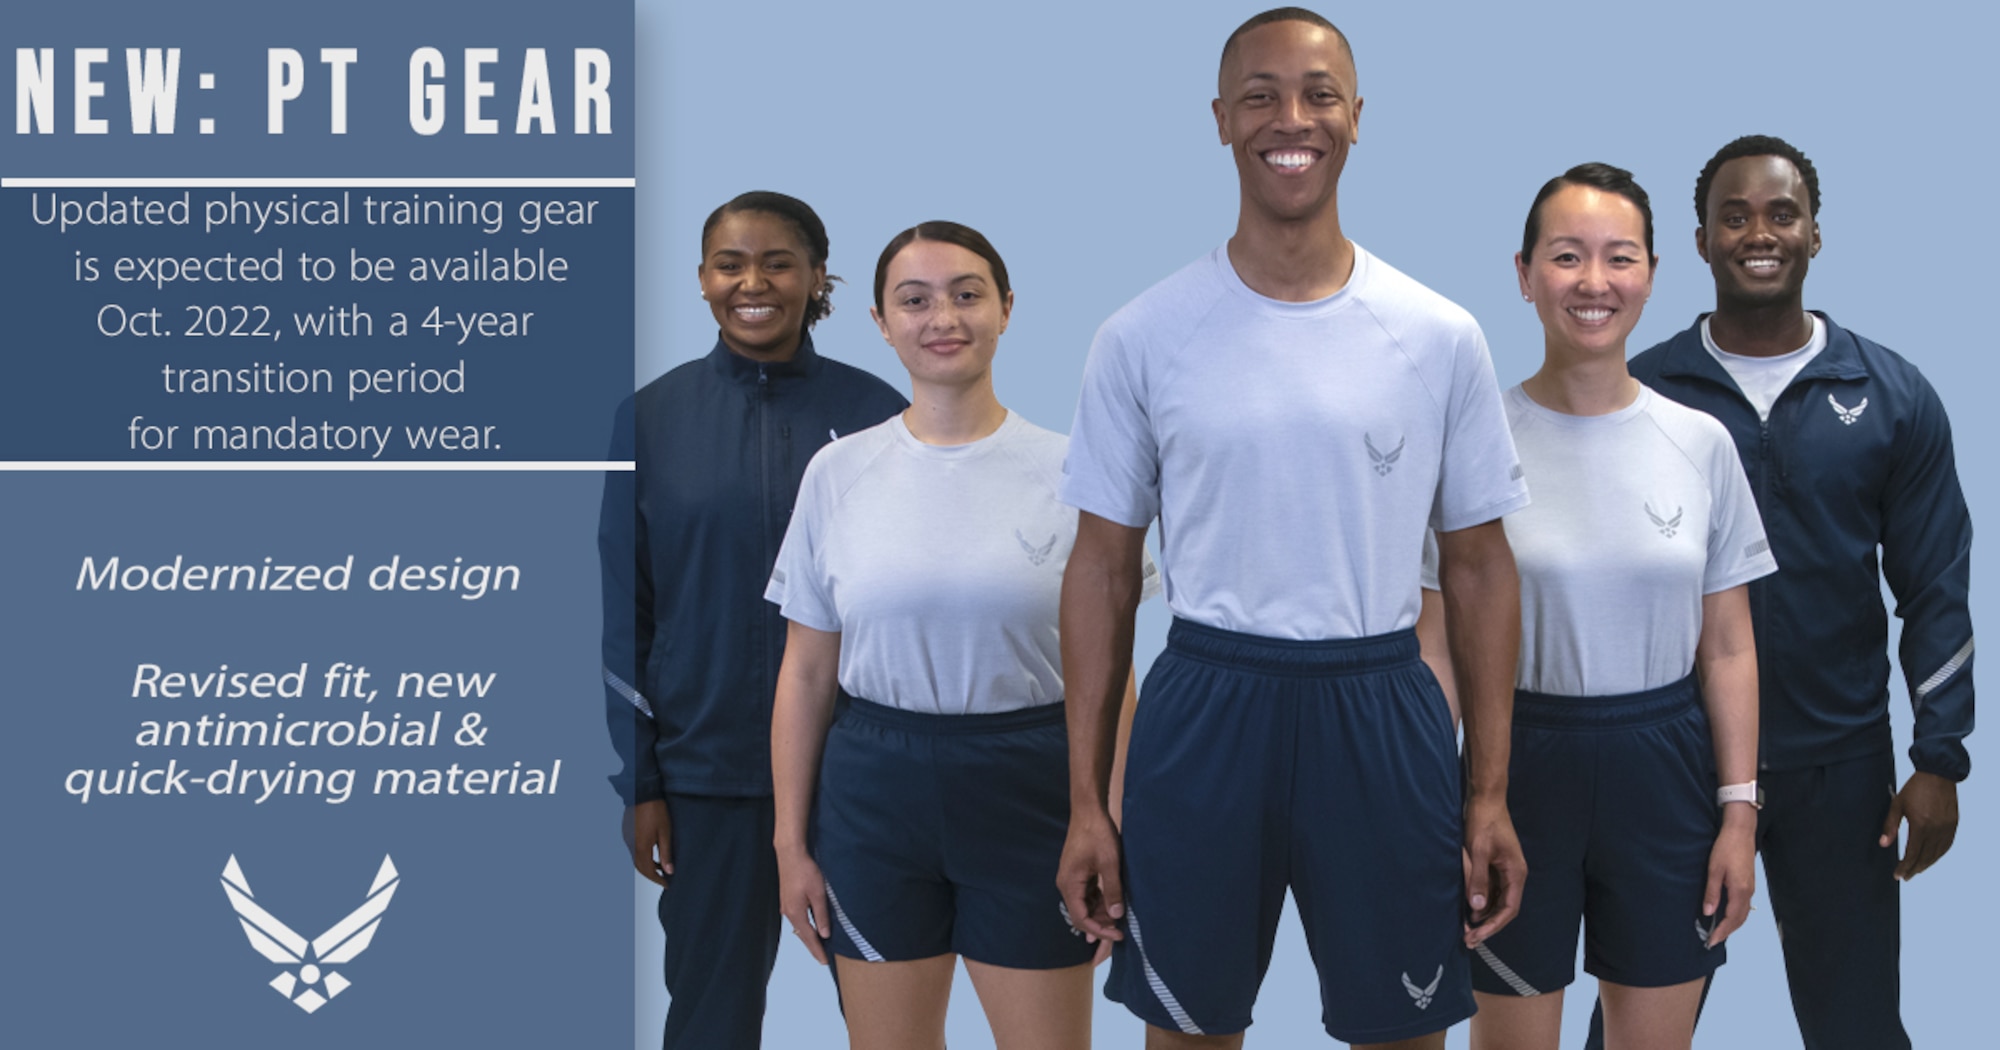 New dress and appearance changes are expected to be released in early October 2021 upon the updated publication of Air Force Instruction 36-2903, Dress and Appearance of Air Force Personnel. Changes include male bulk hair standards, cosmetic tattooing, female hair accessory size, optional hosiery in dress uniform, transparent piercing spacers and morale patches. (U.S. Air Force illustration)